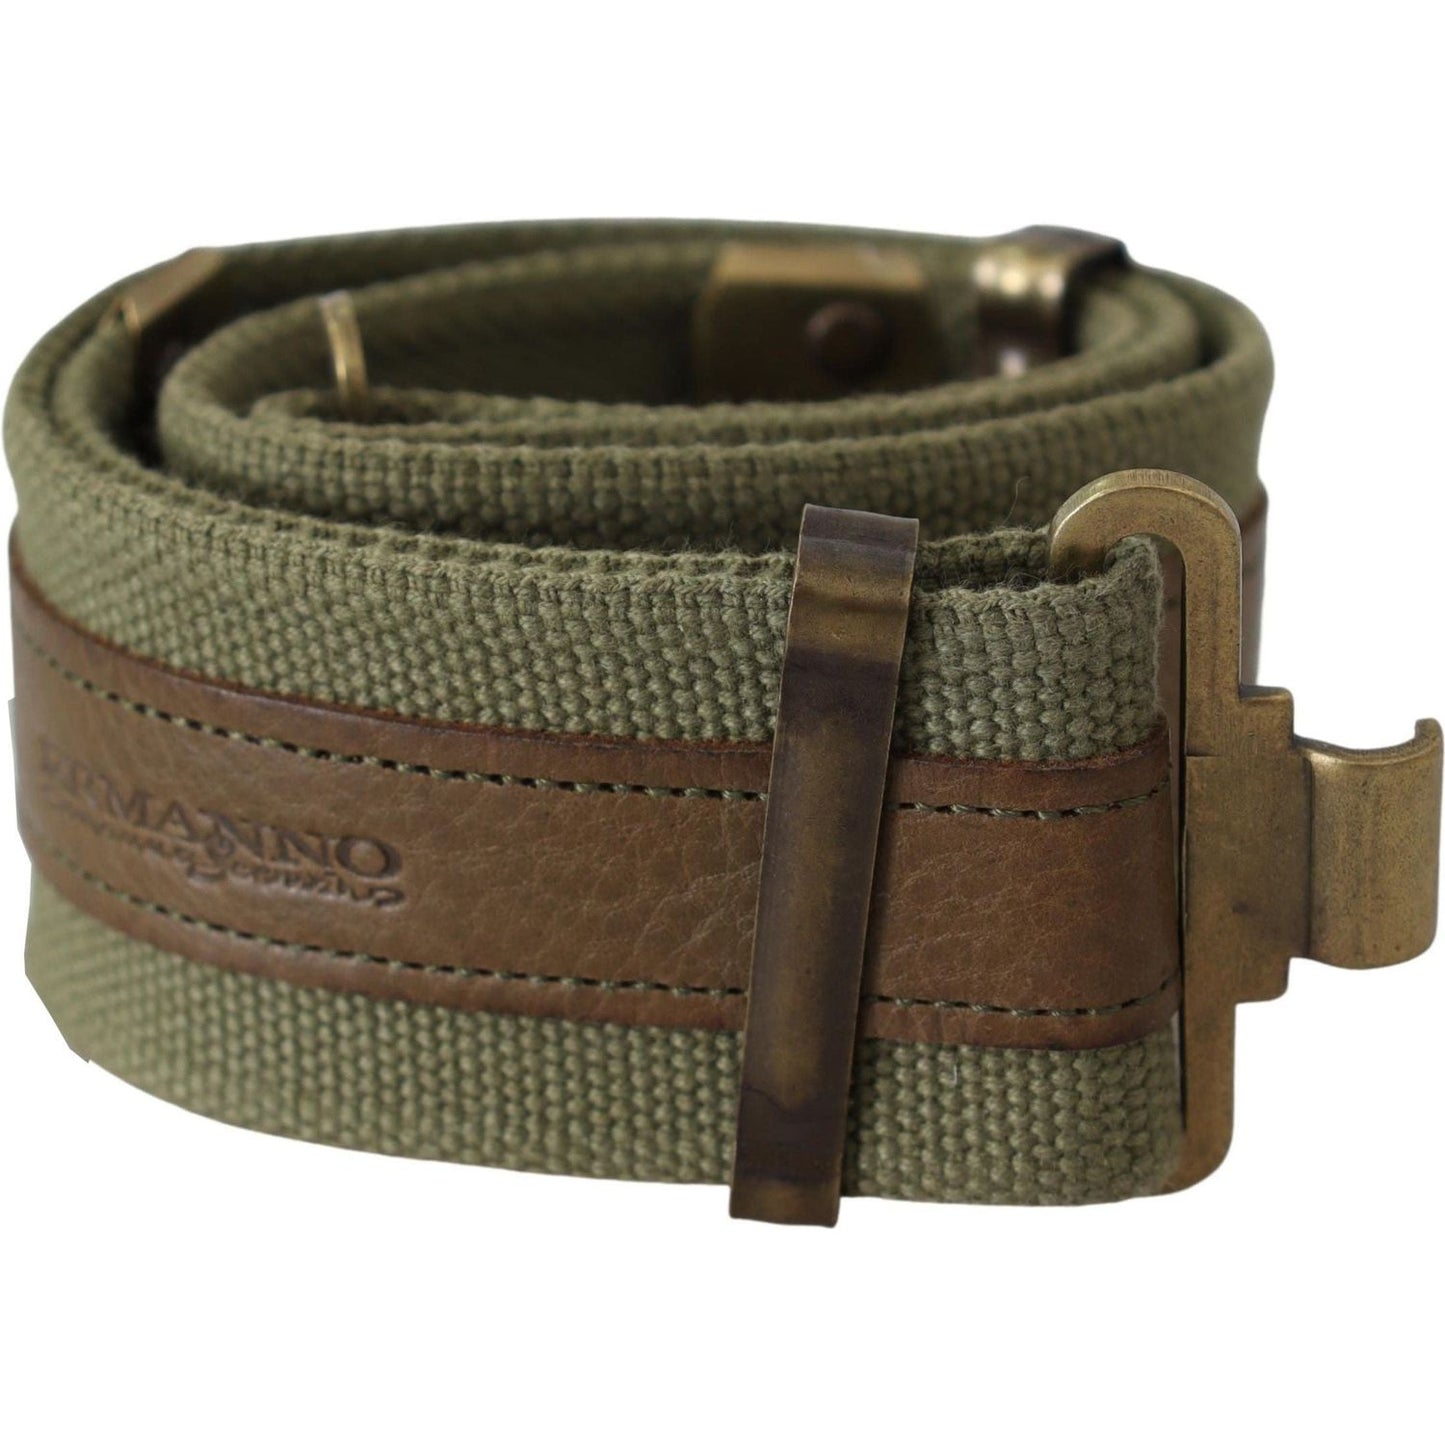 Ermanno Scervino Chic Army Green Rustic Belt Belt green-leather-rustic-bronze-buckle-army-belt